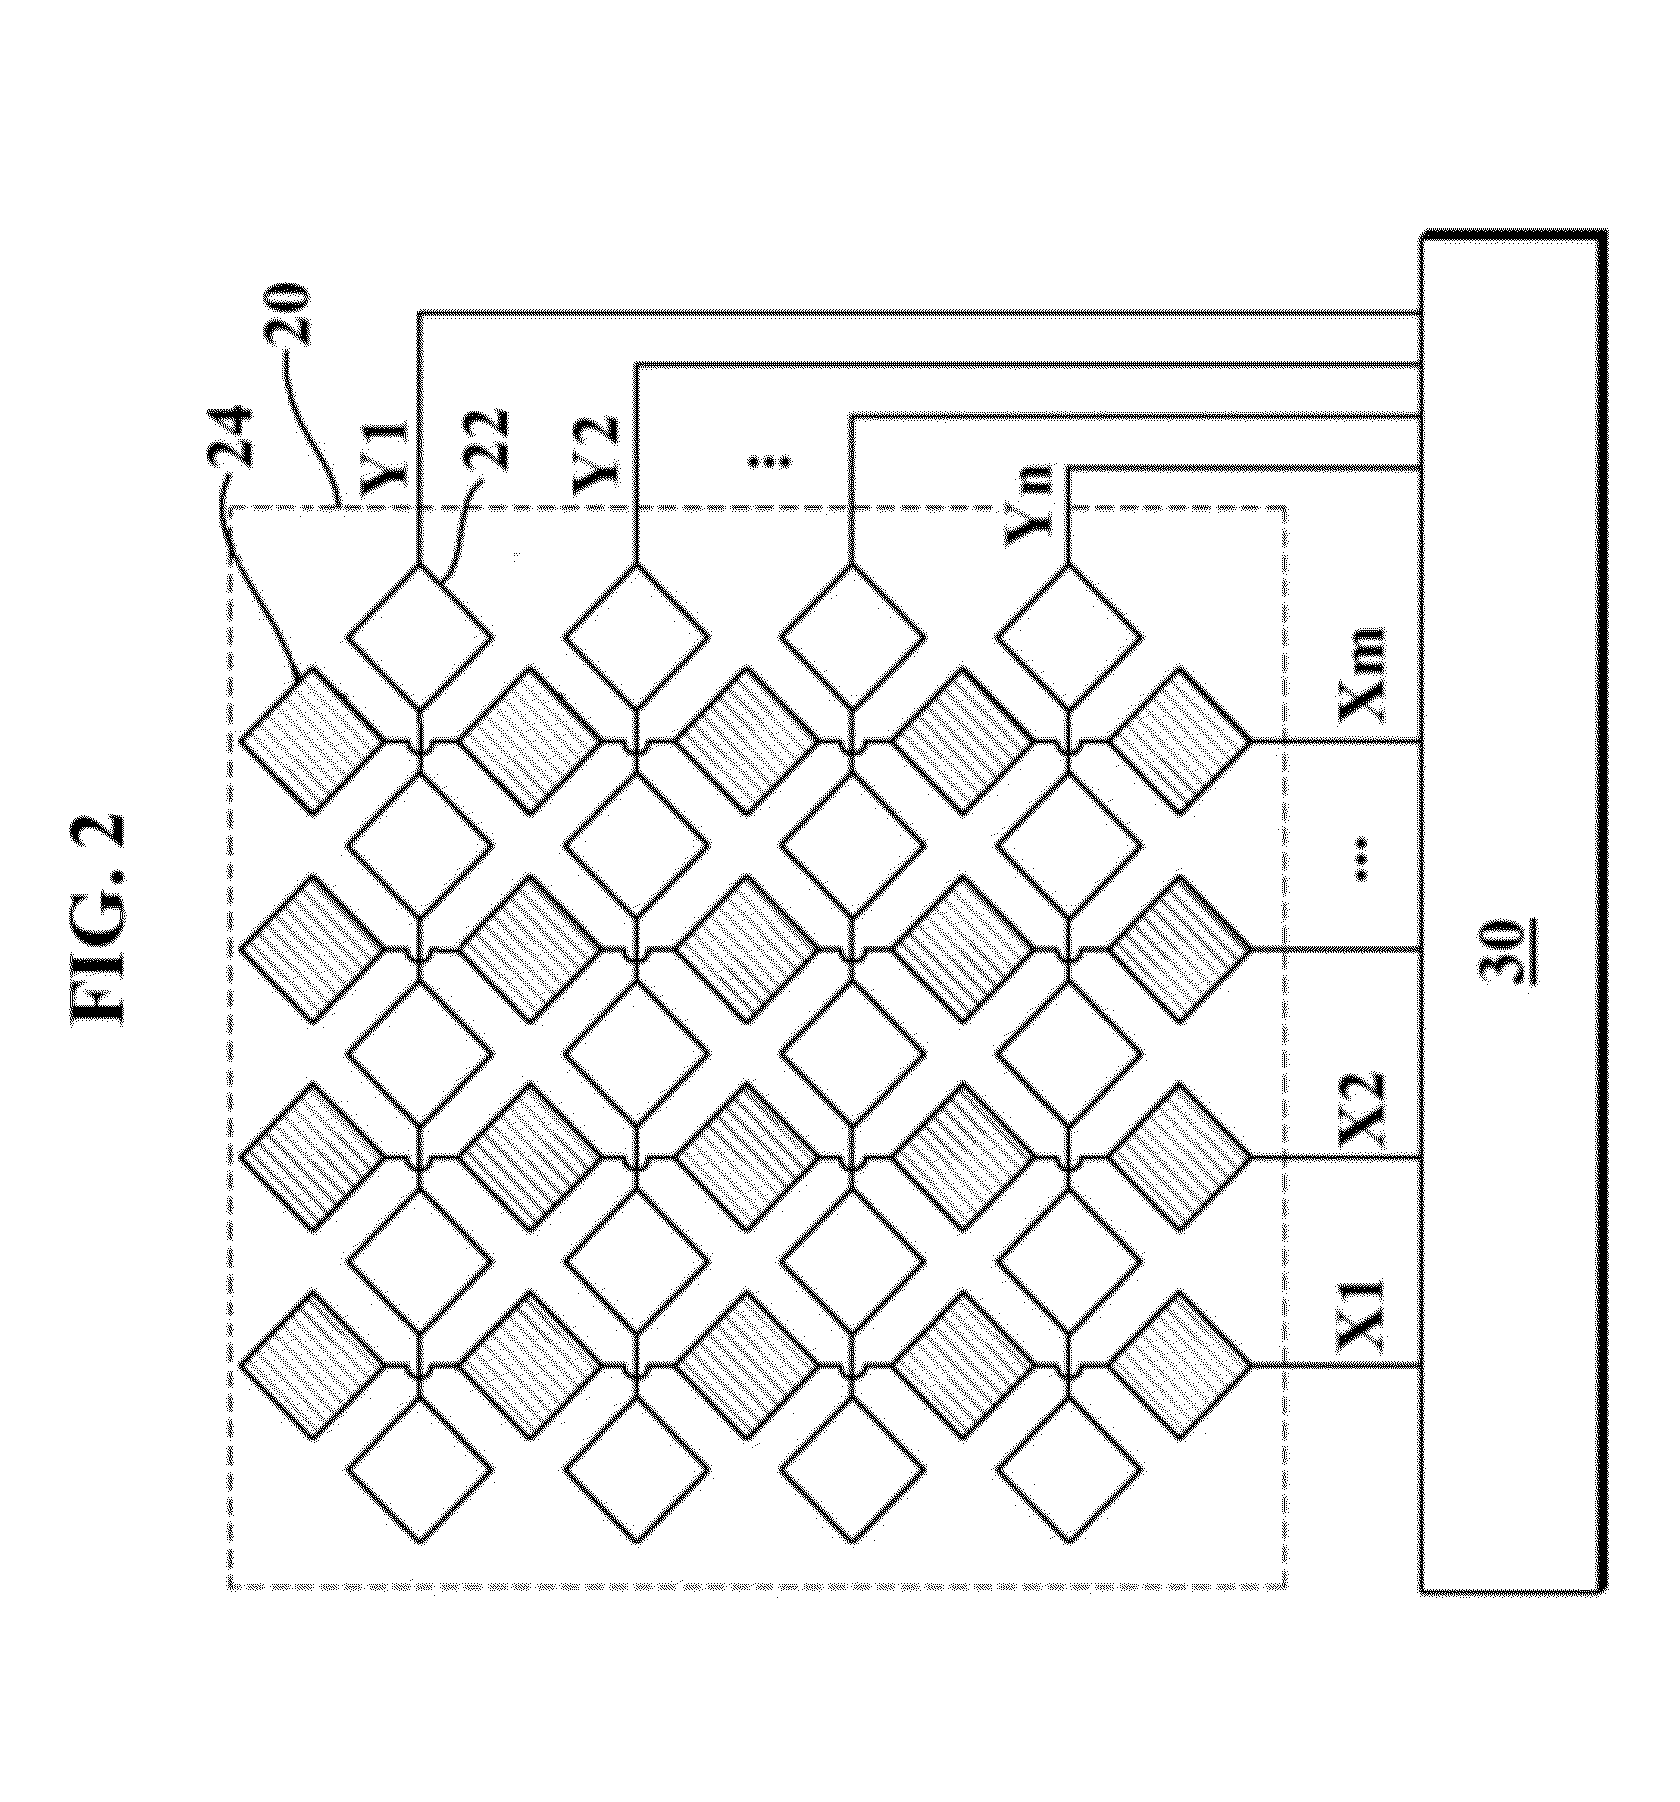 Apparatus and method for driving touch sensor